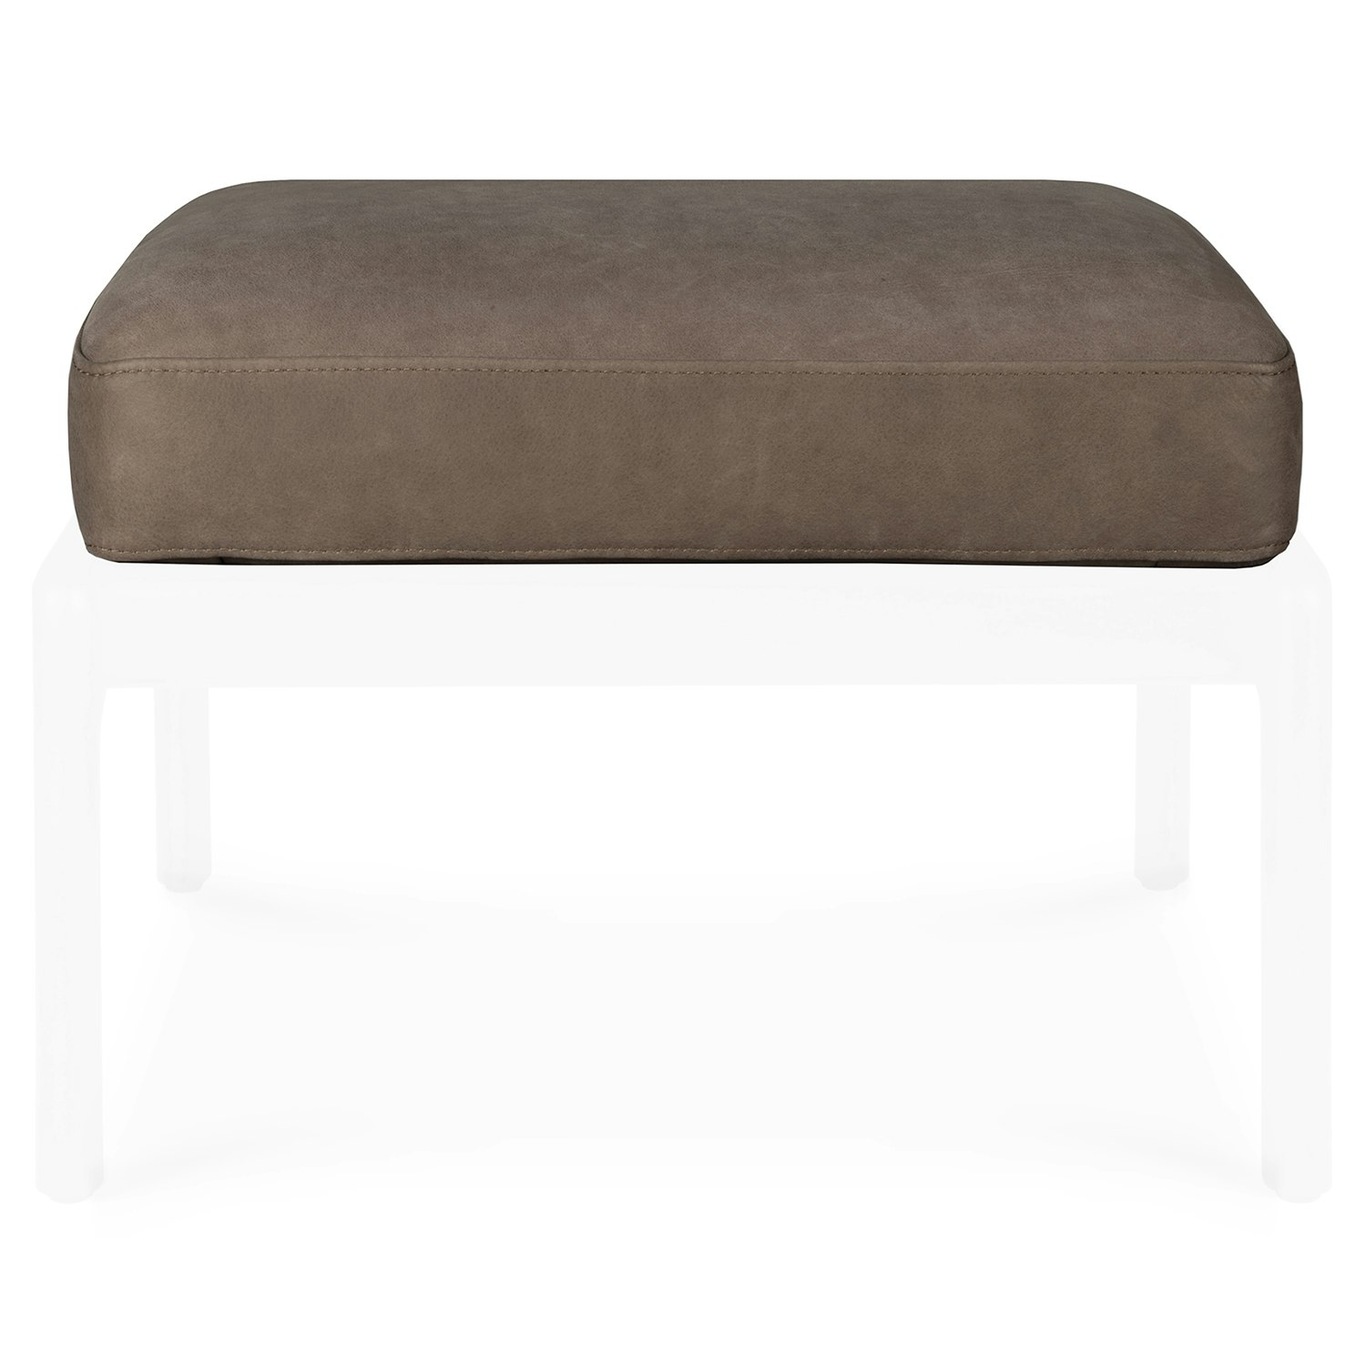 Jack Cushion For Jack Footstool, Brown Leather